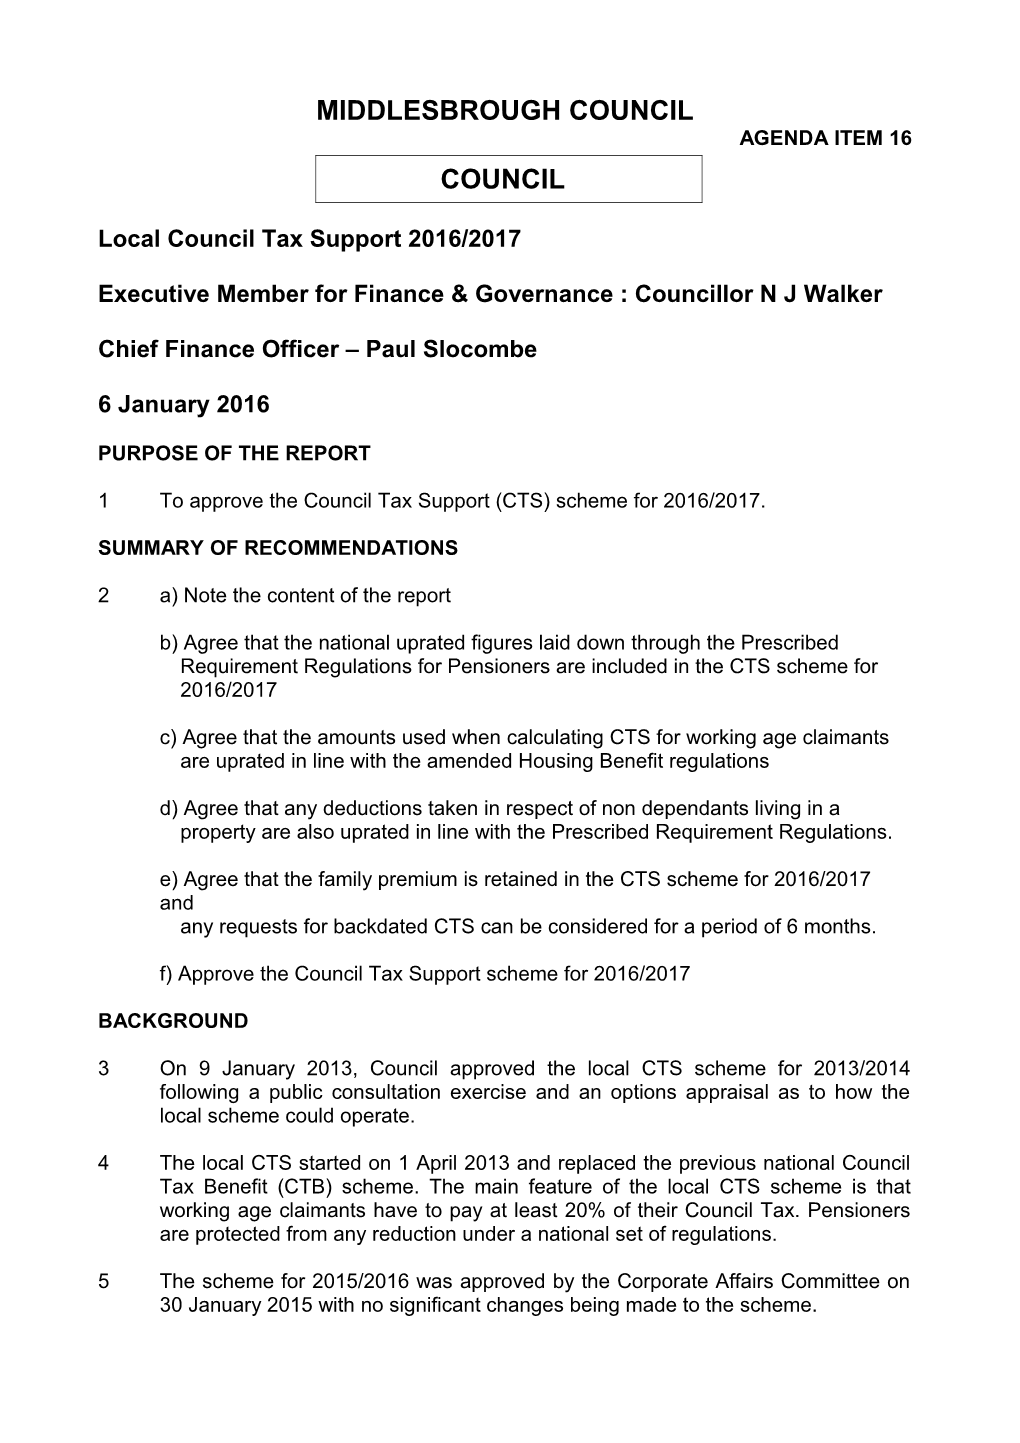 Local Council Tax Support 2016/2017